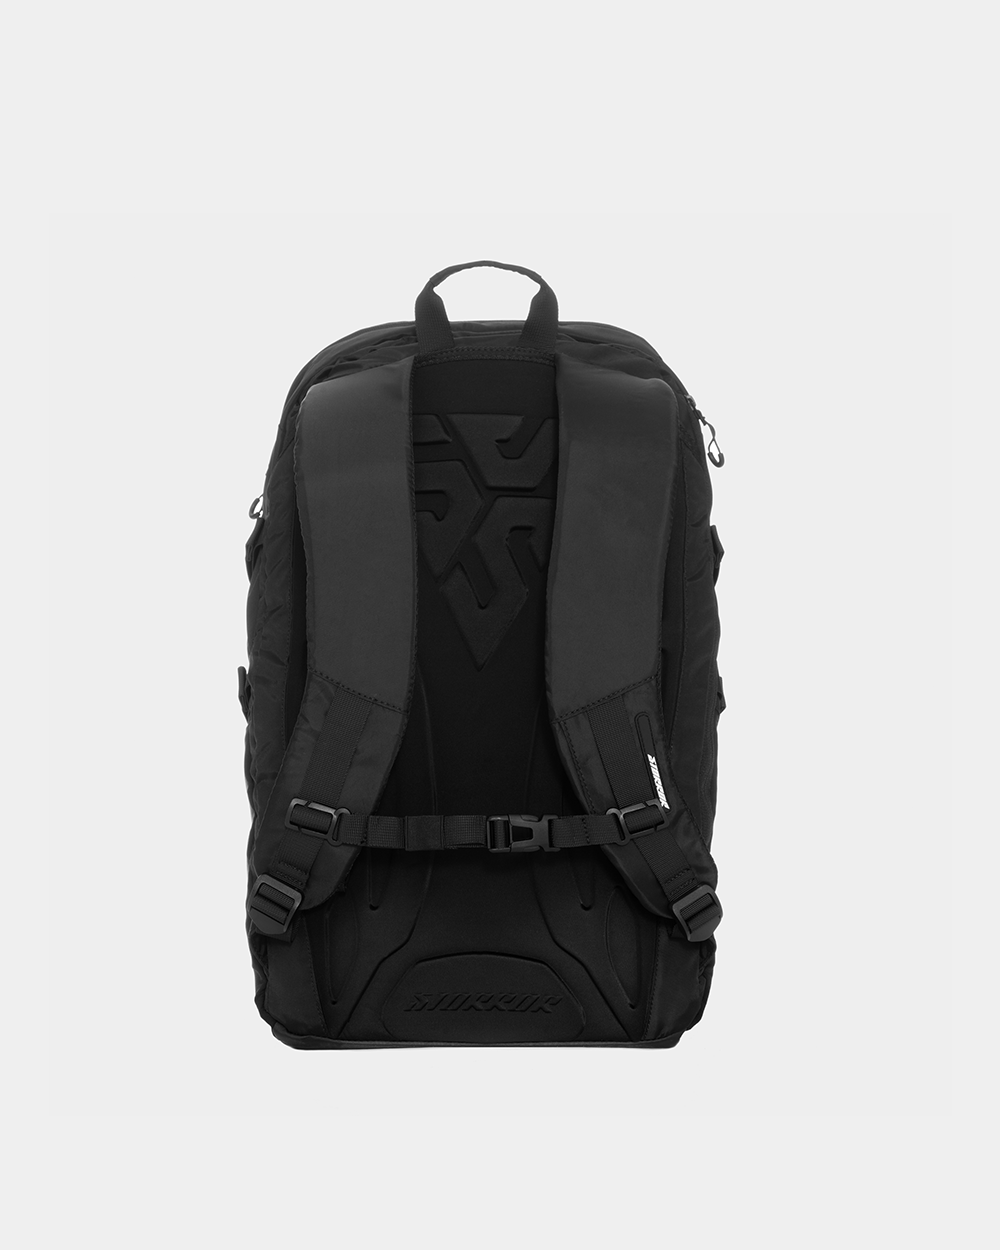 EXPLORE BACKPACK